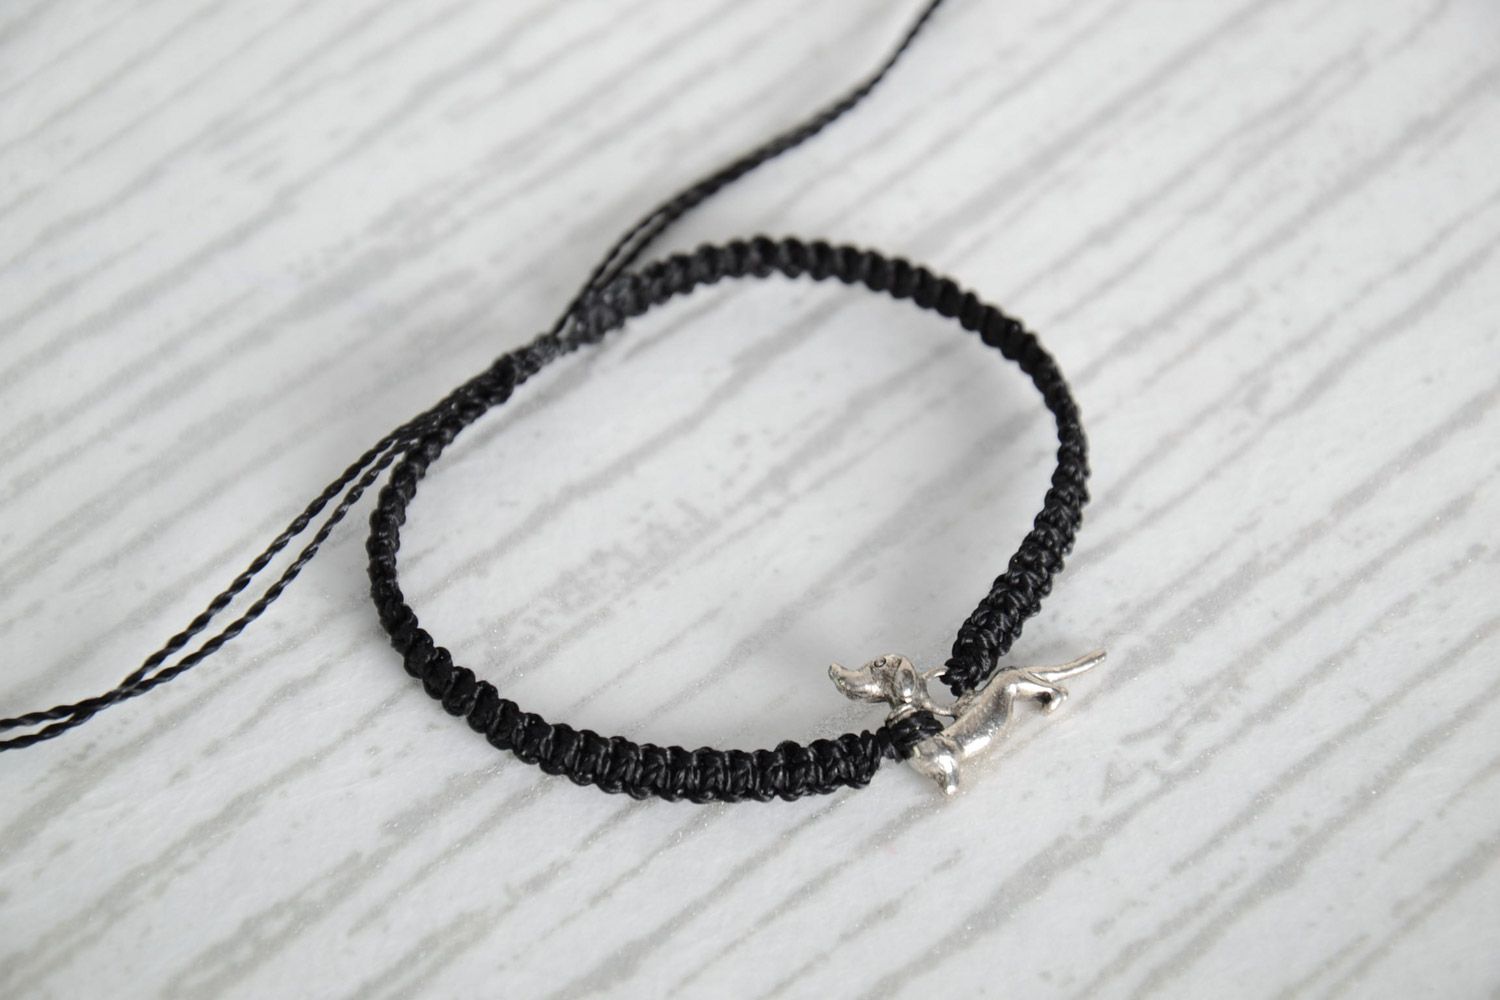 Handmade friendship bracelet woven of gray threads with a badger-dog charm photo 1